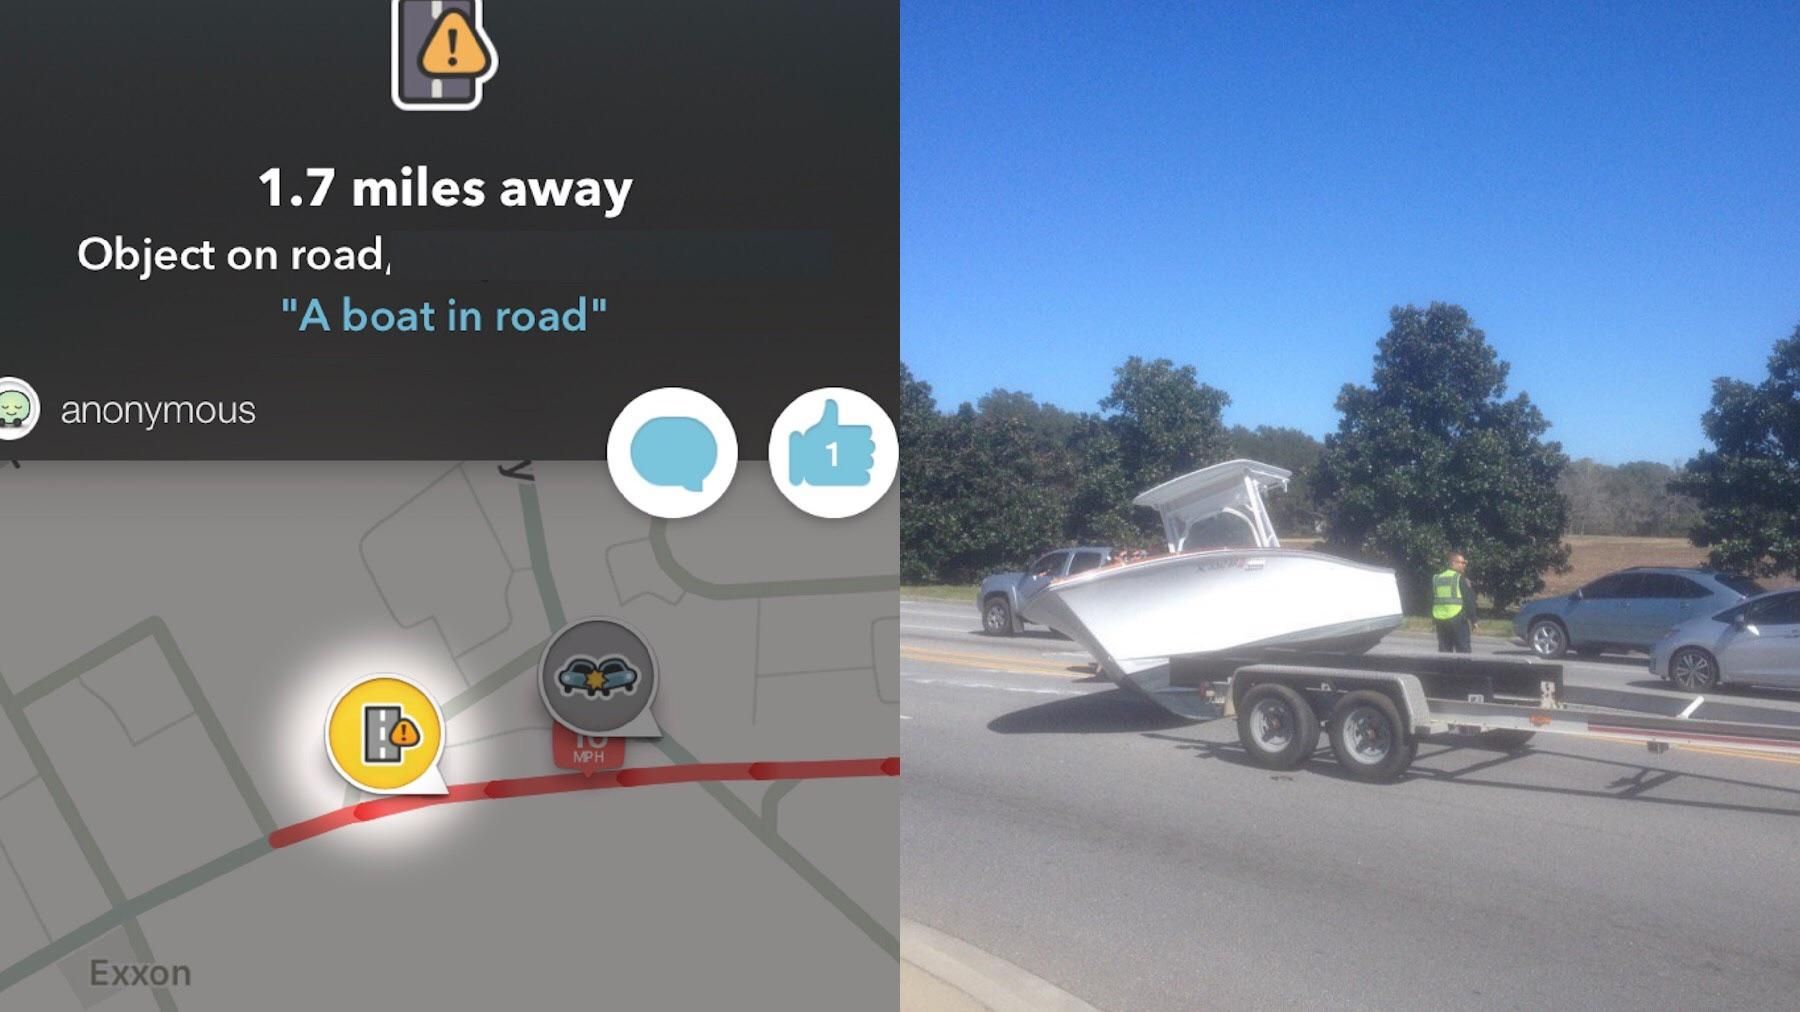 Waze said there was a boat in the road. Really?